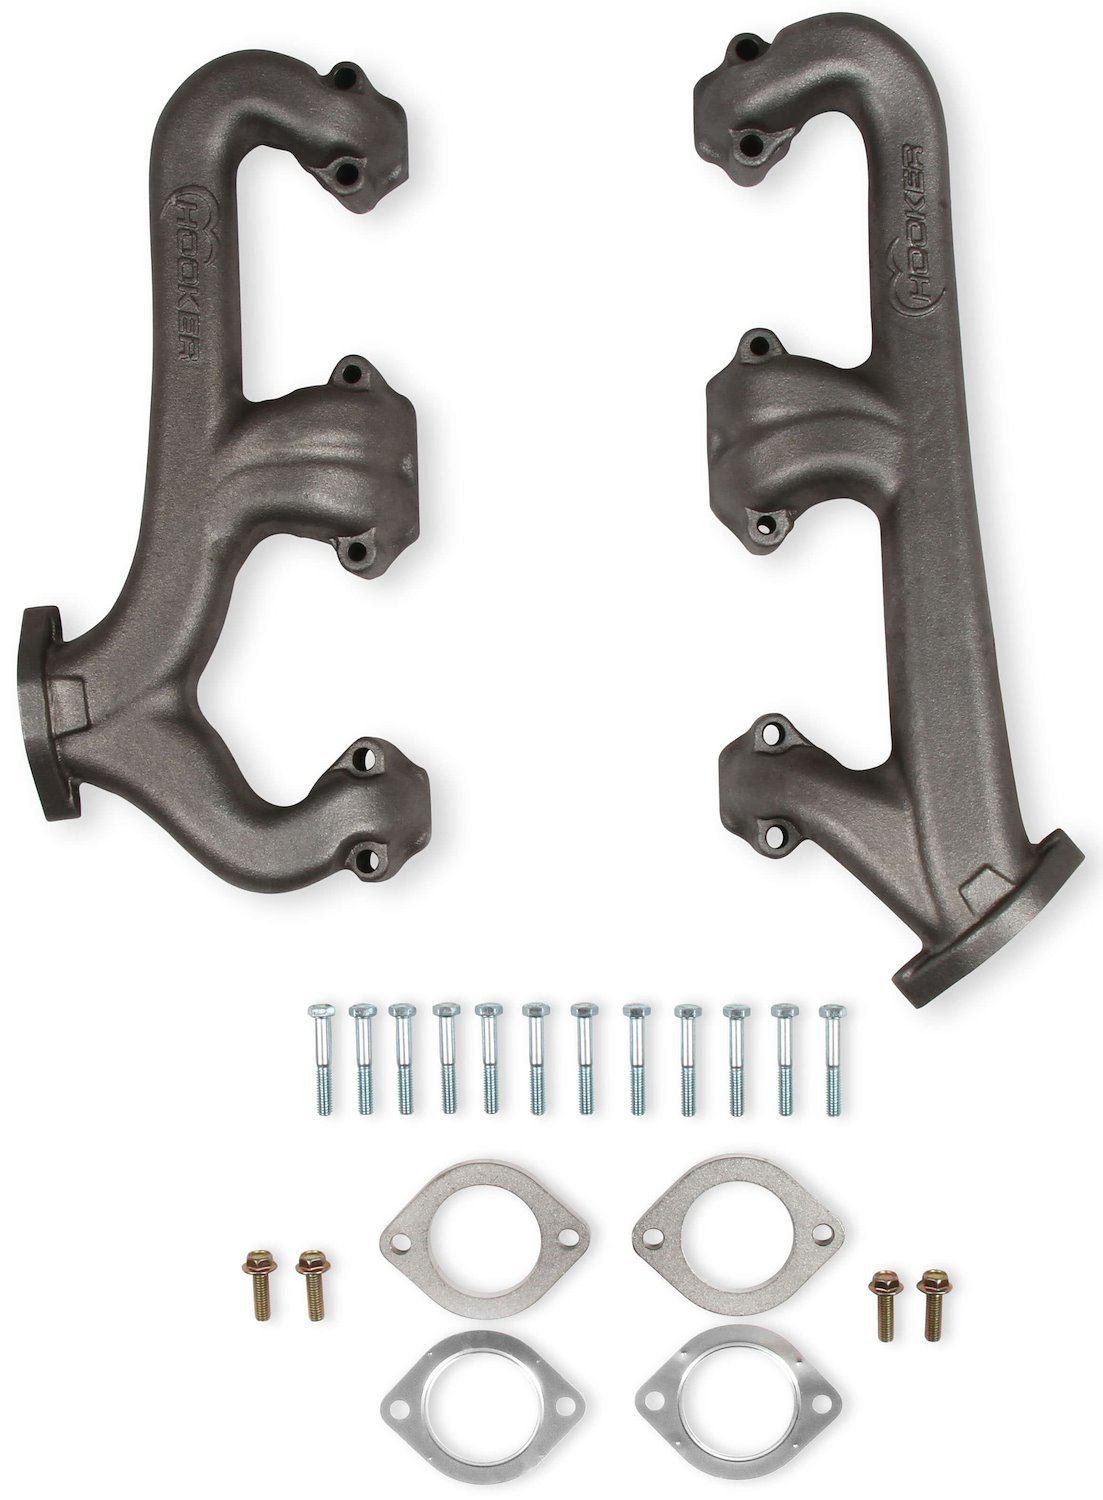 Exhaust Manifolds for Small Block Chevy 262-400 V8 (Gen I) [Raw/Natural]